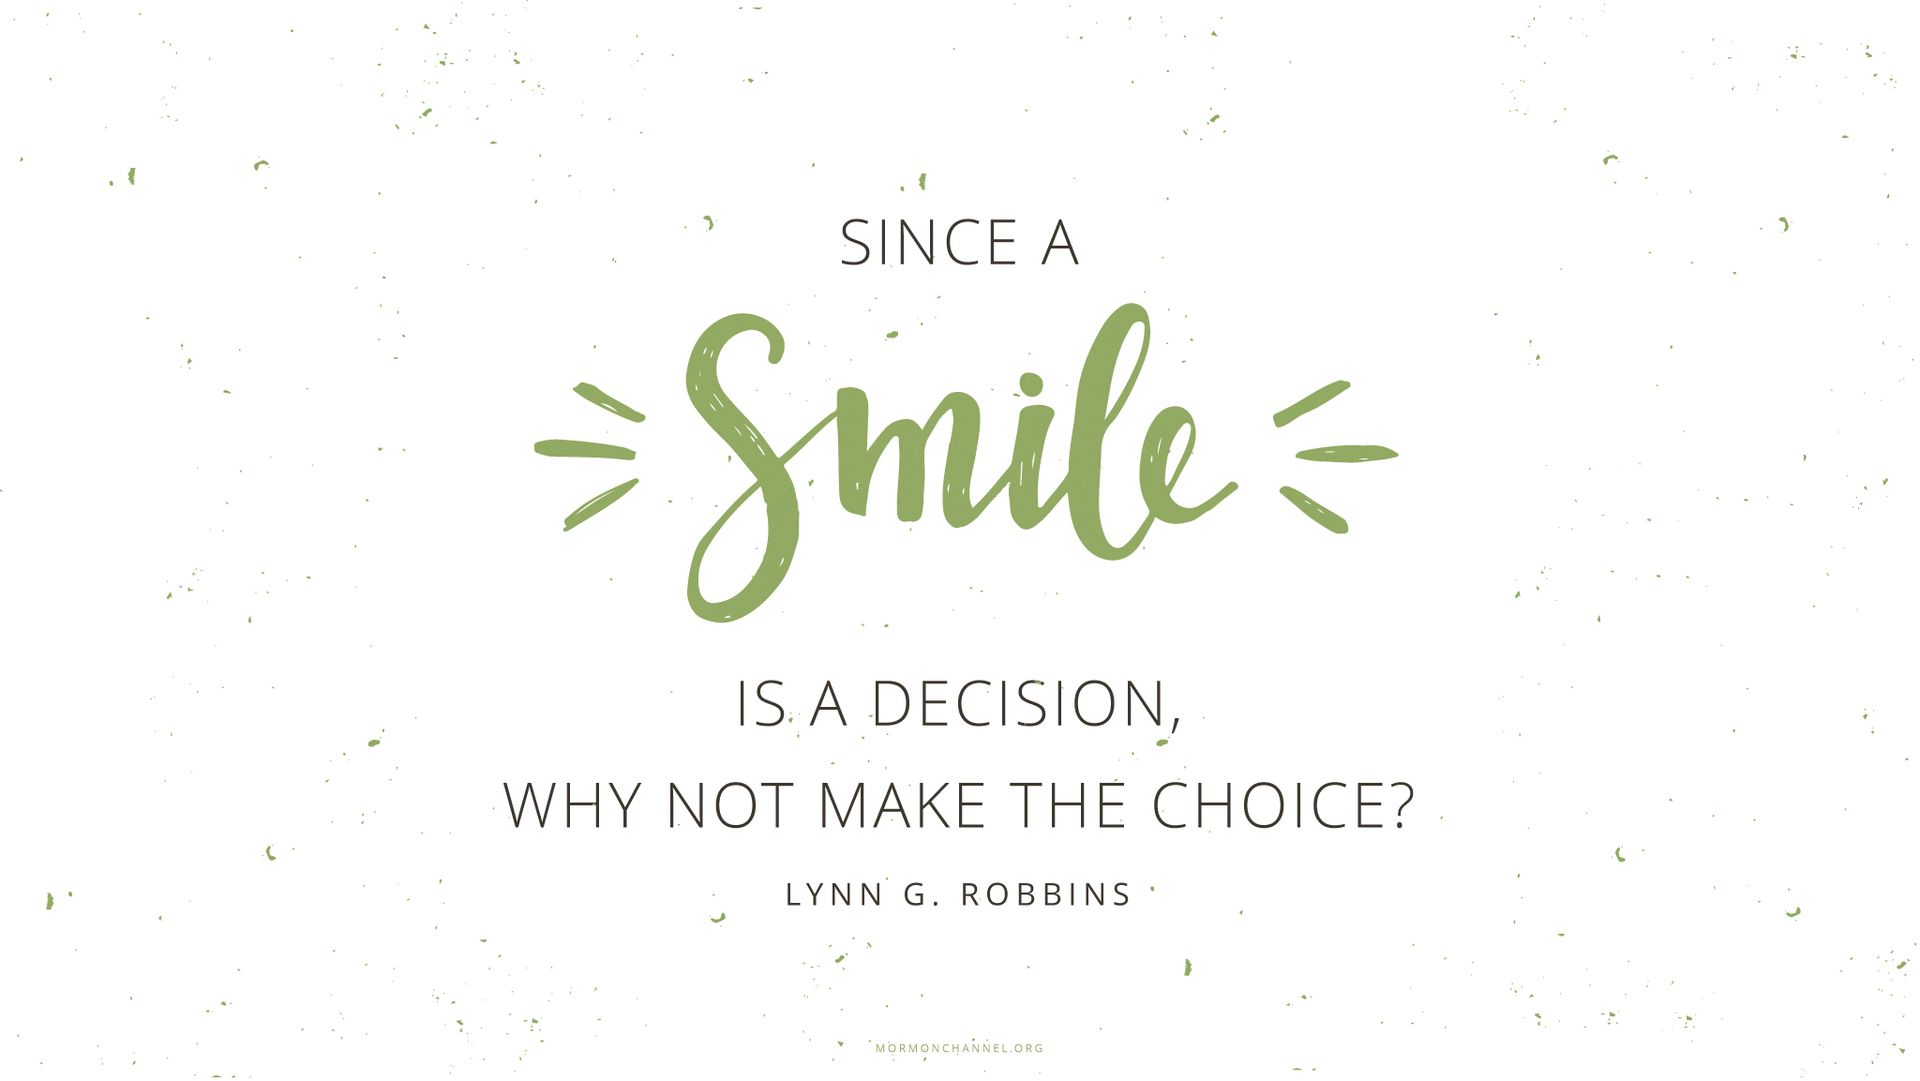 “Since a smile is a decision, why not make the choice?”—Elder Lynn G. Robbins